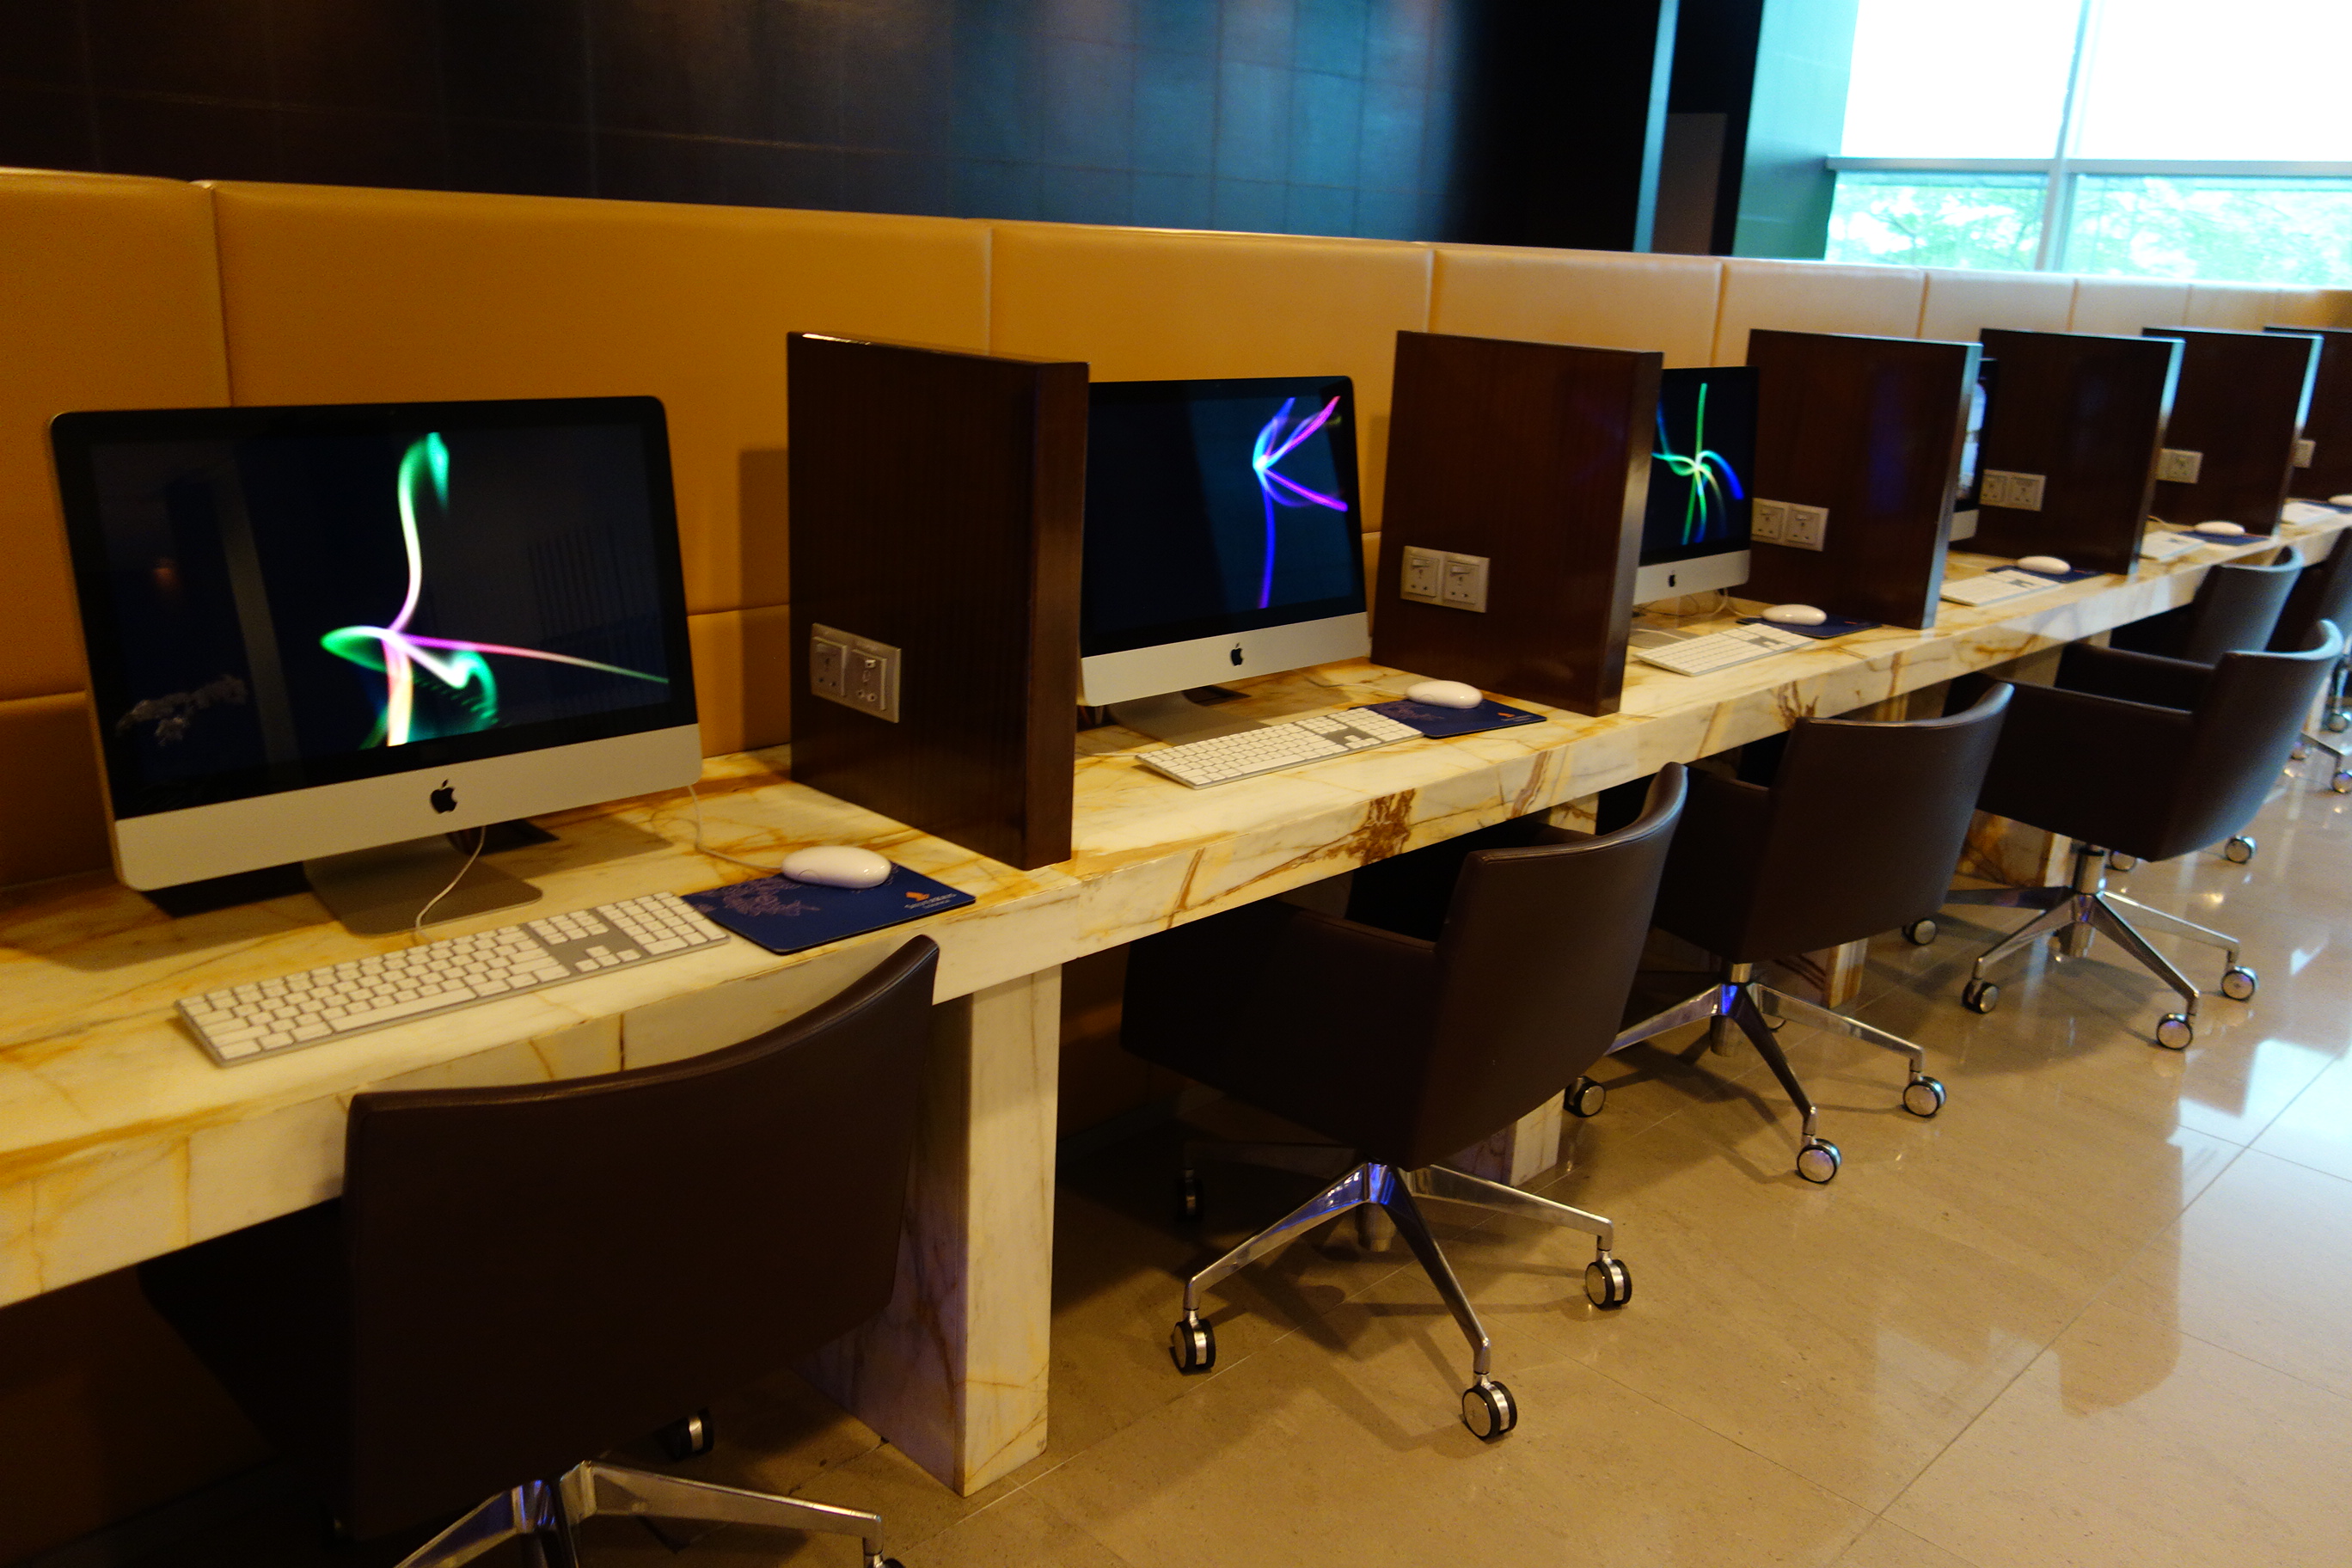 iMac work stations (they also had PCs)